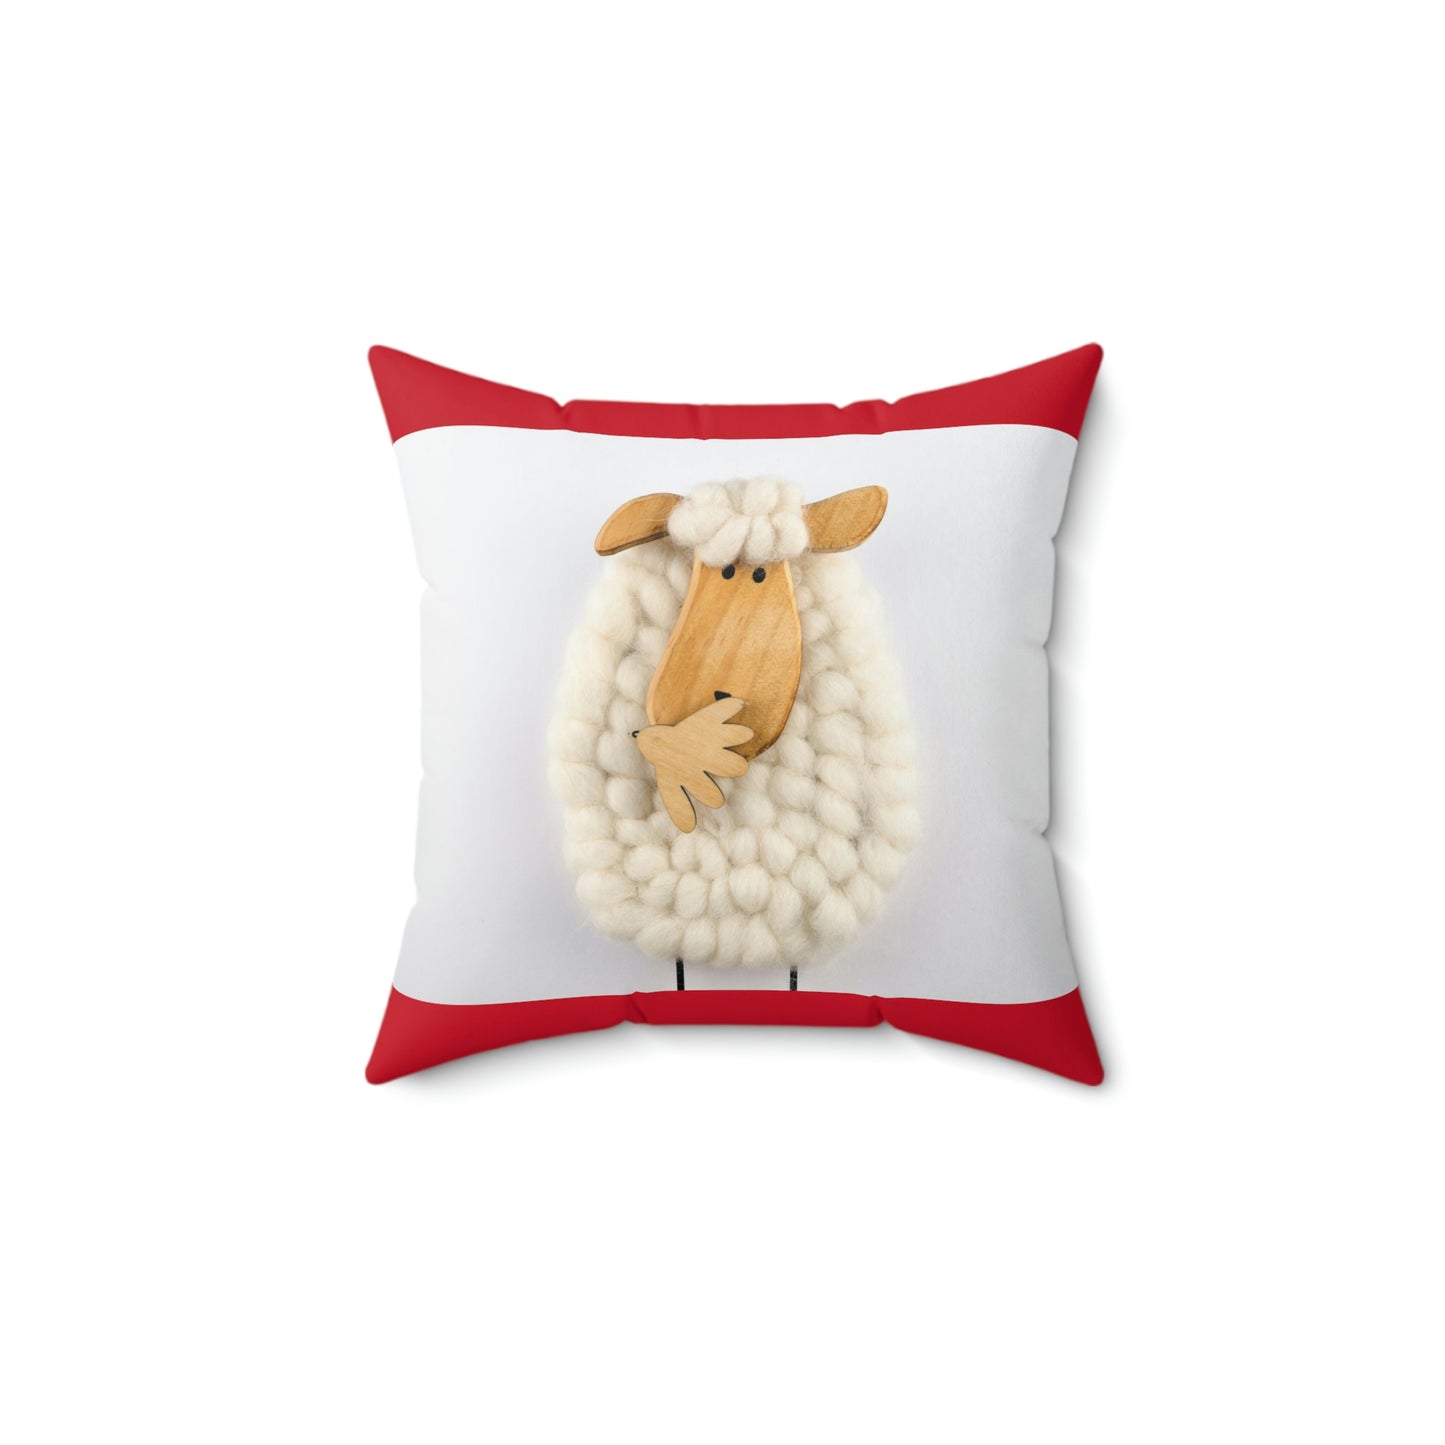 Sheep Pillow Case - Red and White Colors - Faux Suede Square Pillow Case